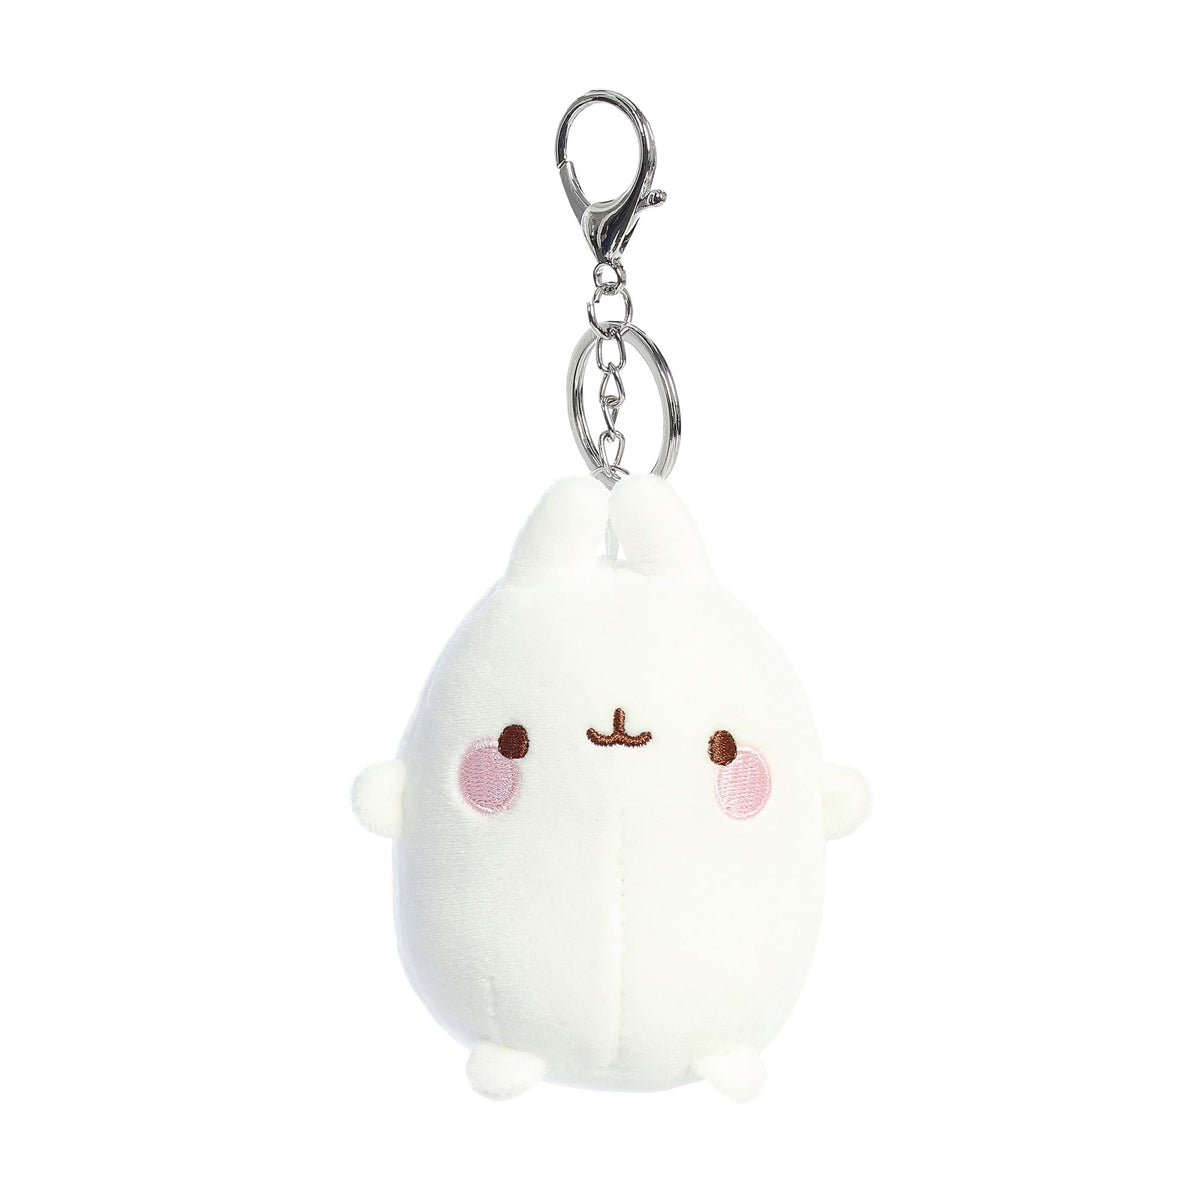 Molang Keychain Plush from the Molang collection, small and soft with embroidered features